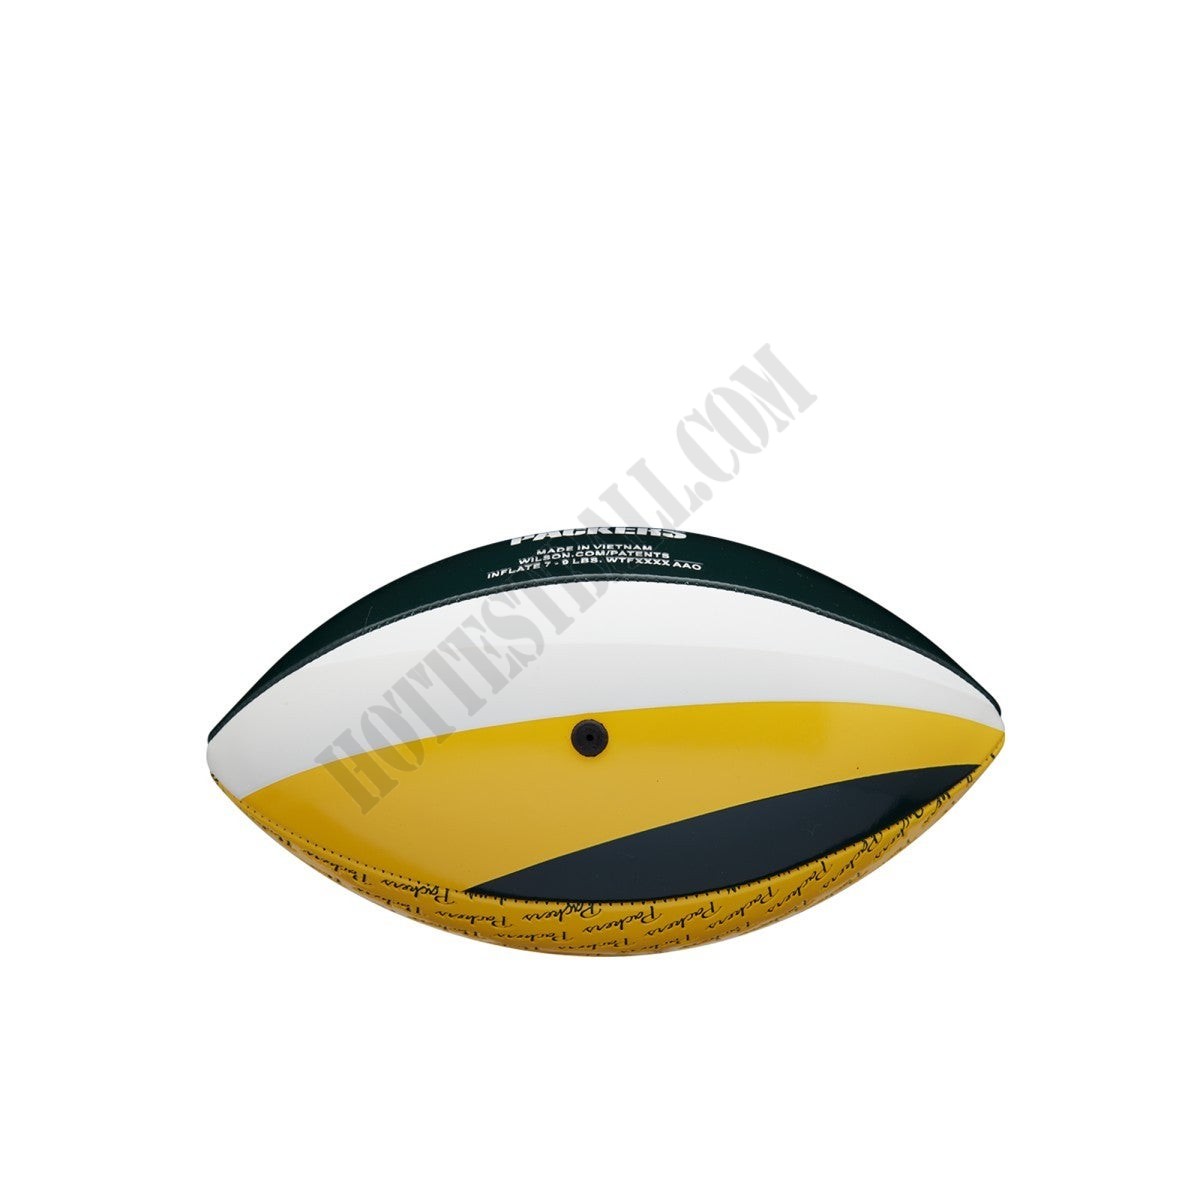 NFL City Pride Football - Green Bay Packers ● Wilson Promotions - -3